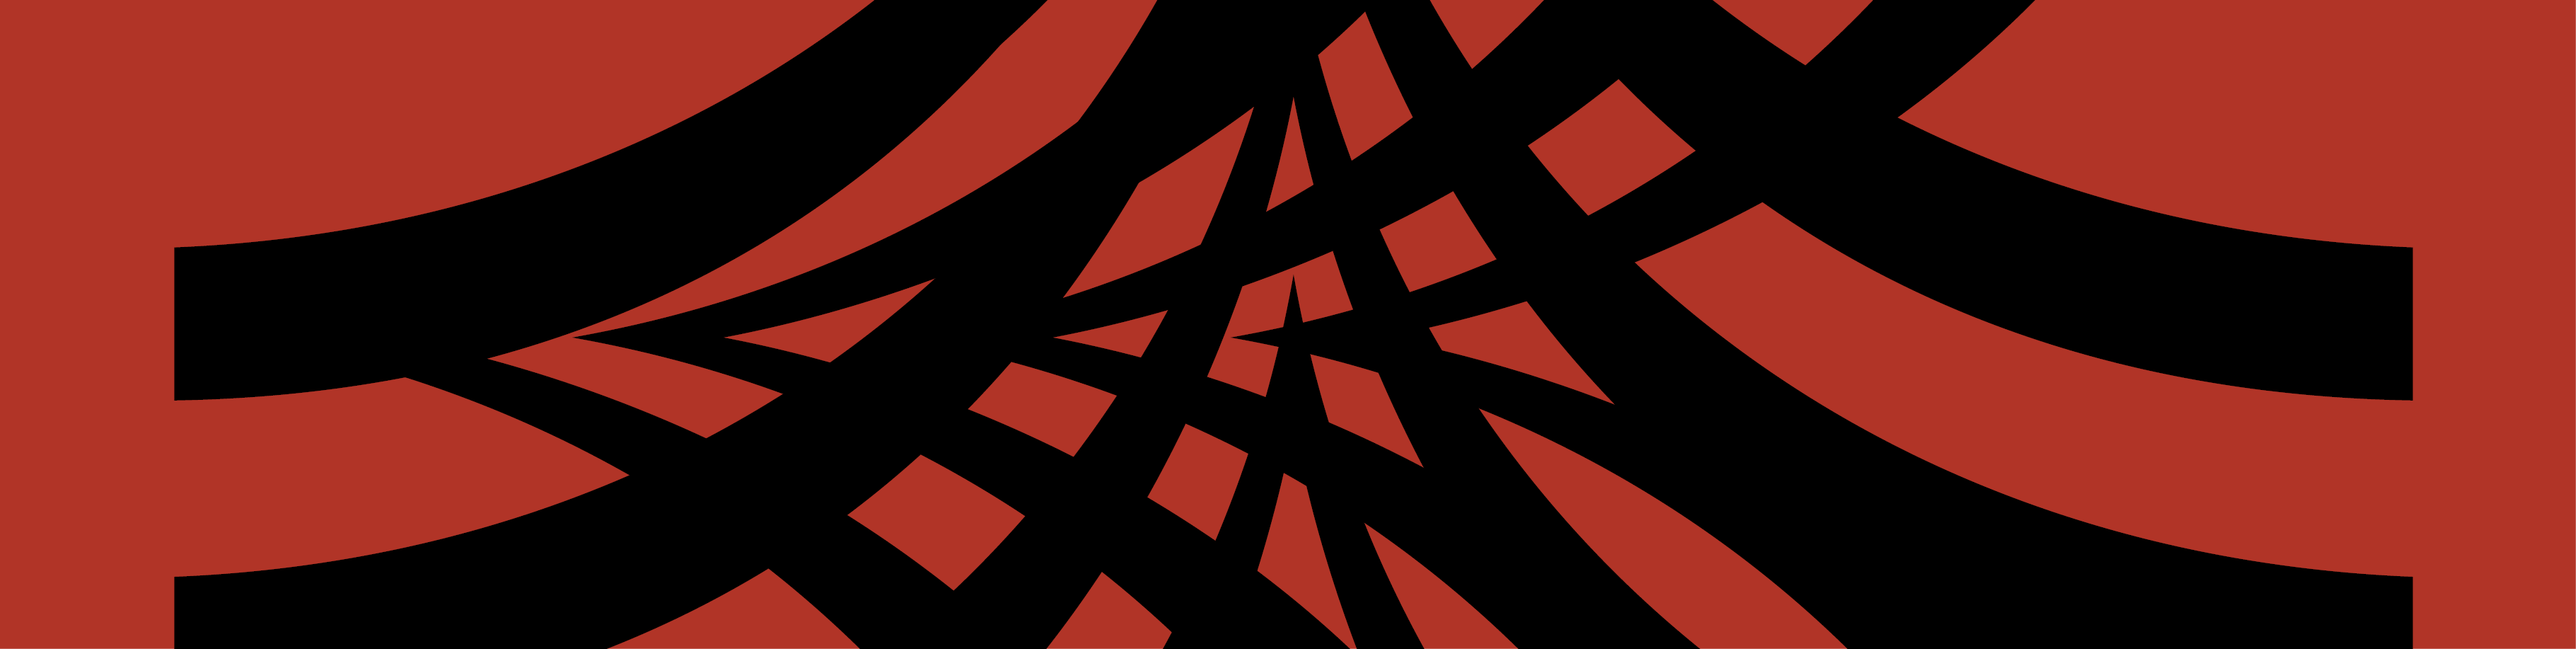 Red background with black curved lines on it. 